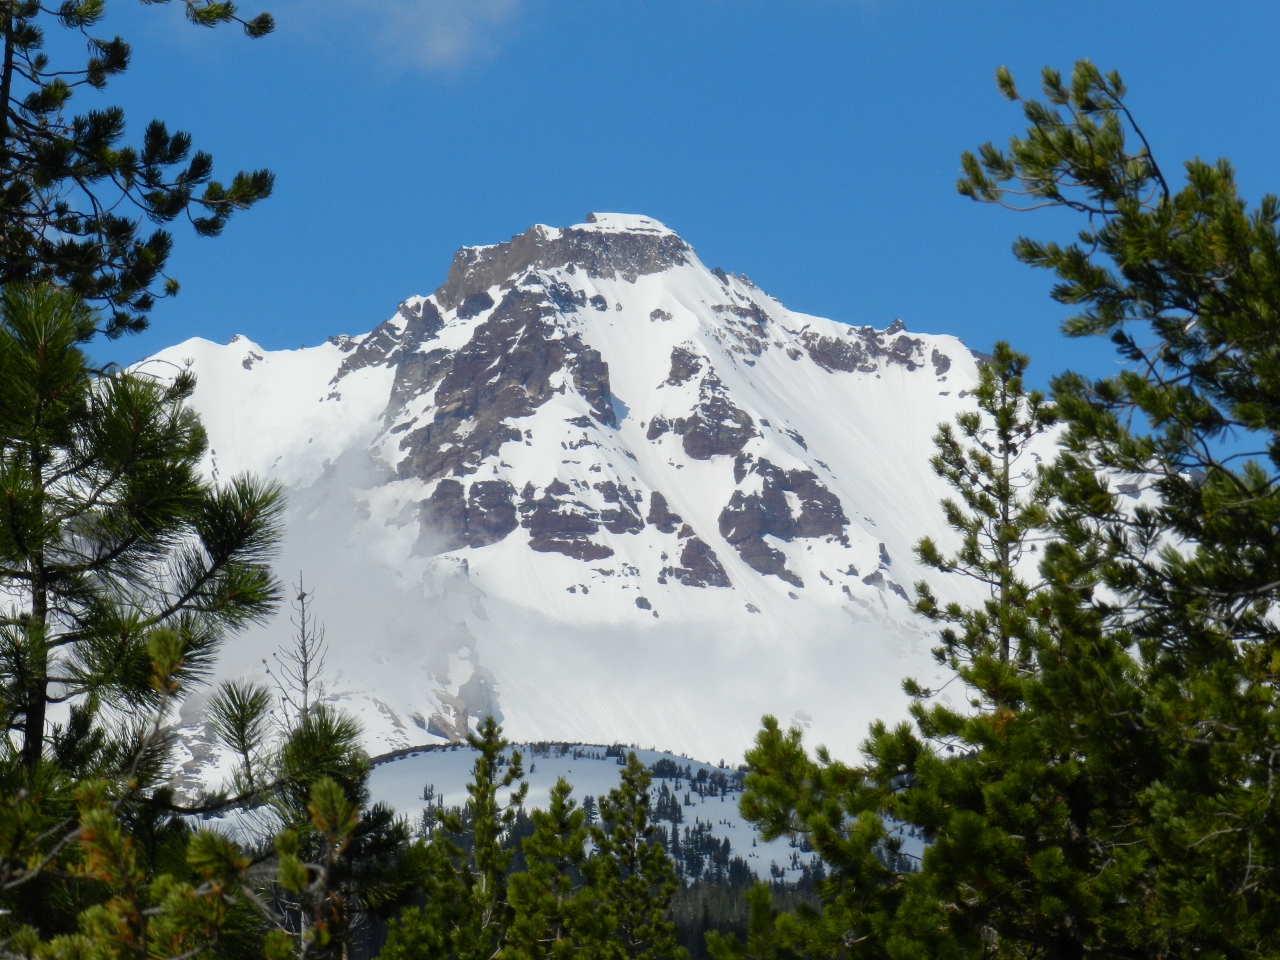 North Sister from the Pole Creek Trail